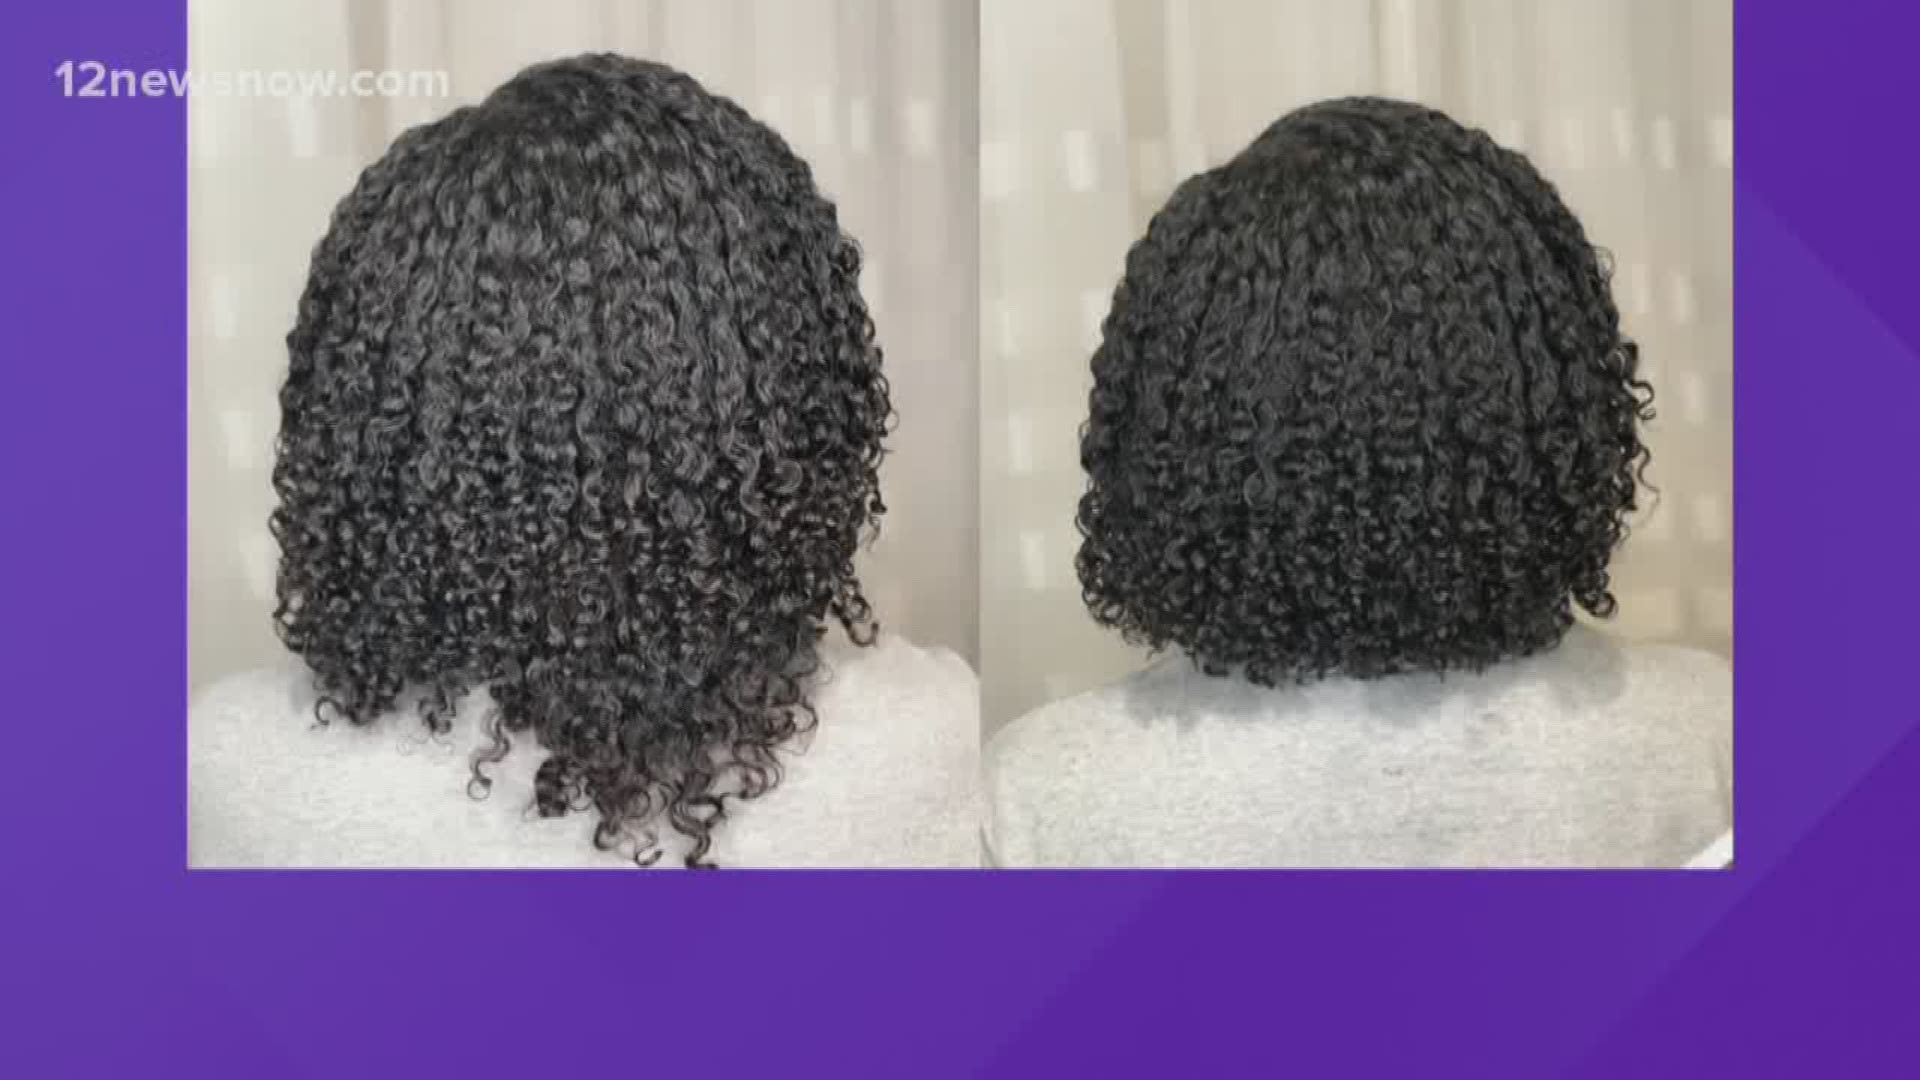 For more tips on natural curls, be sure to follow Tierria Joseph on Instagram, @beautfulkurlsllc.